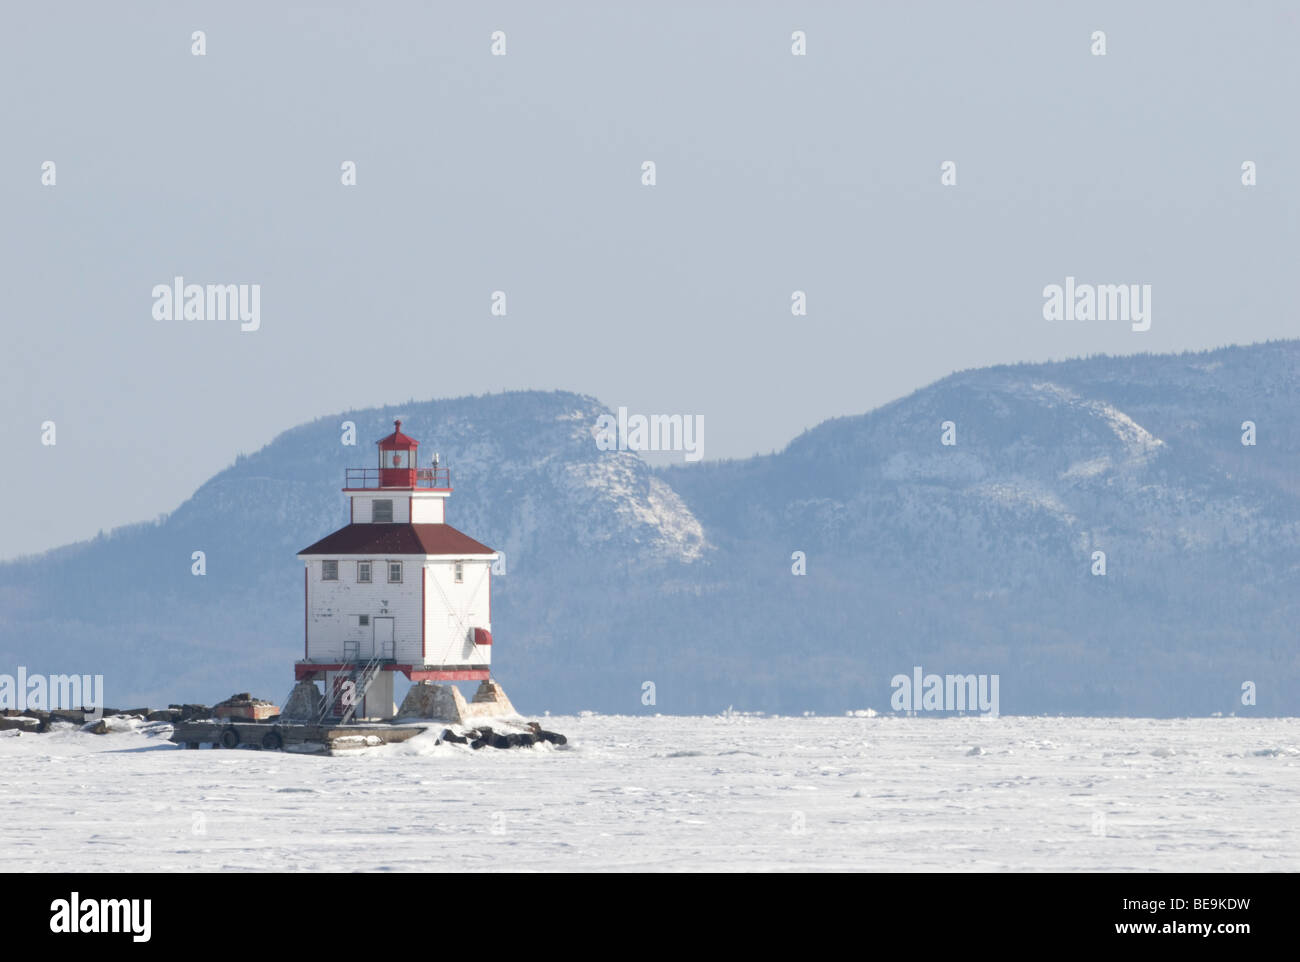 The frozen lake with a lighthouse Stock Photo